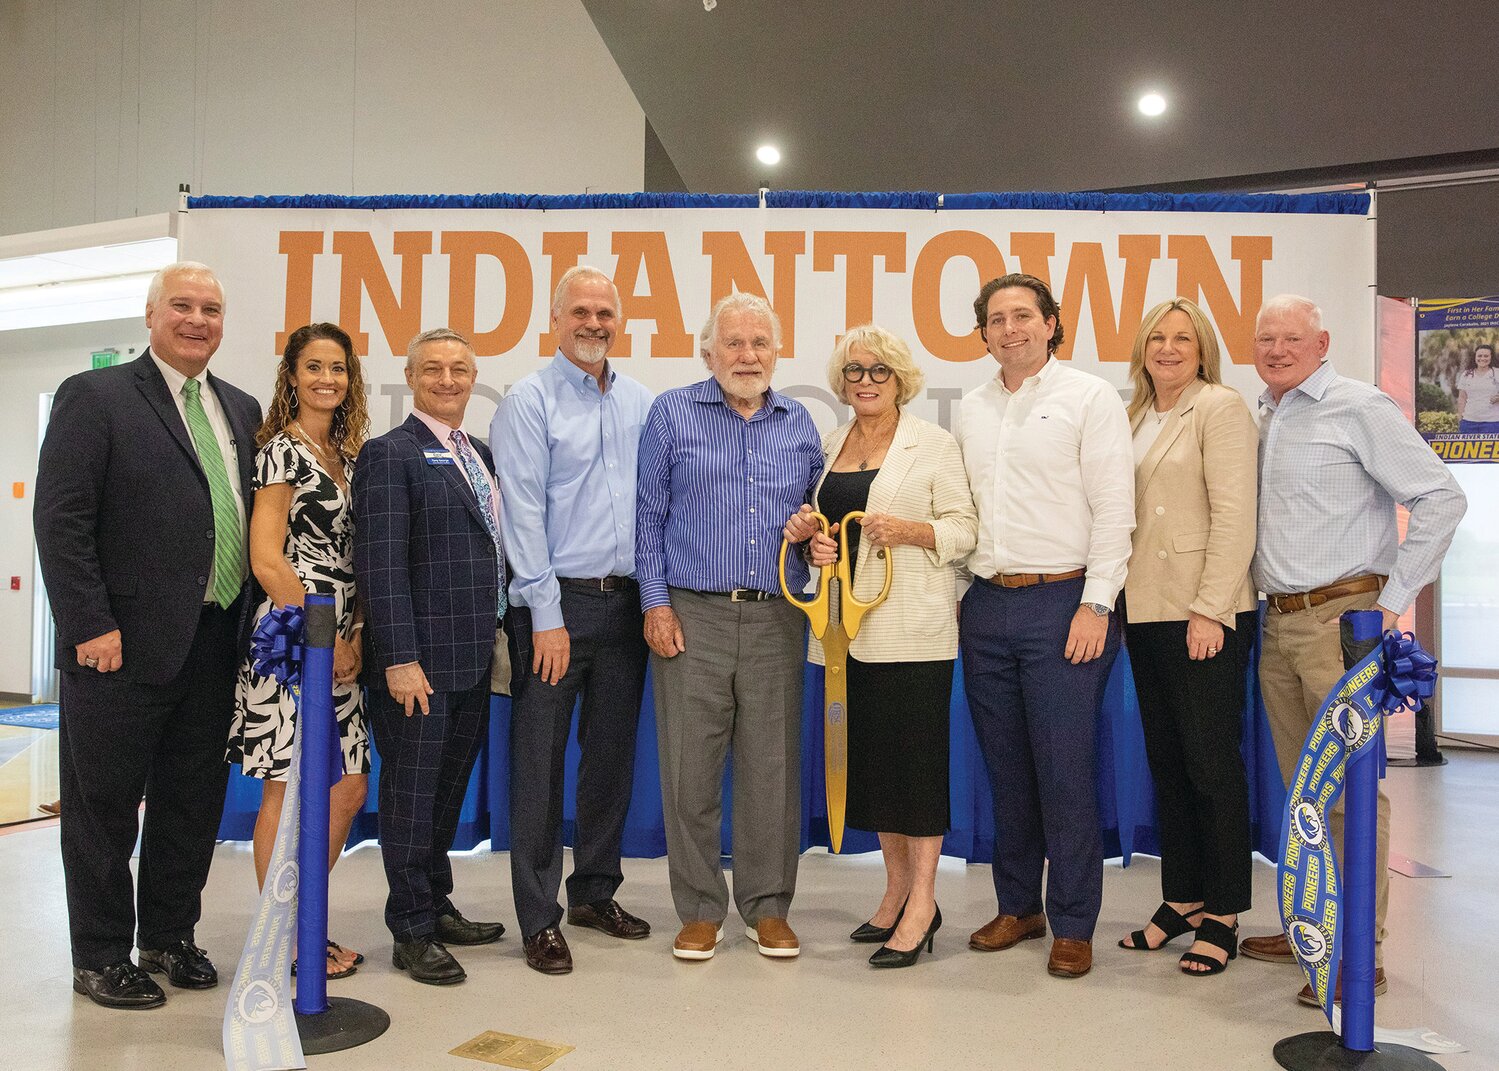 Dr. Timothy Moore, IRSC President; Melissa D. Kindell, IRSC District Board of Trustees, Okeechobee County; Anthony D. George Jr., J.D., Chair, IRSC District Board of Trustees, Martin County; Chip Johnston, Charles’ son; Charles and Sandra Johnston; Evan Johnston, Charles’ grandson; Marsh Powers, Chair, Martin County School Board; and Kevin Powers, Indiantown Realty Corp